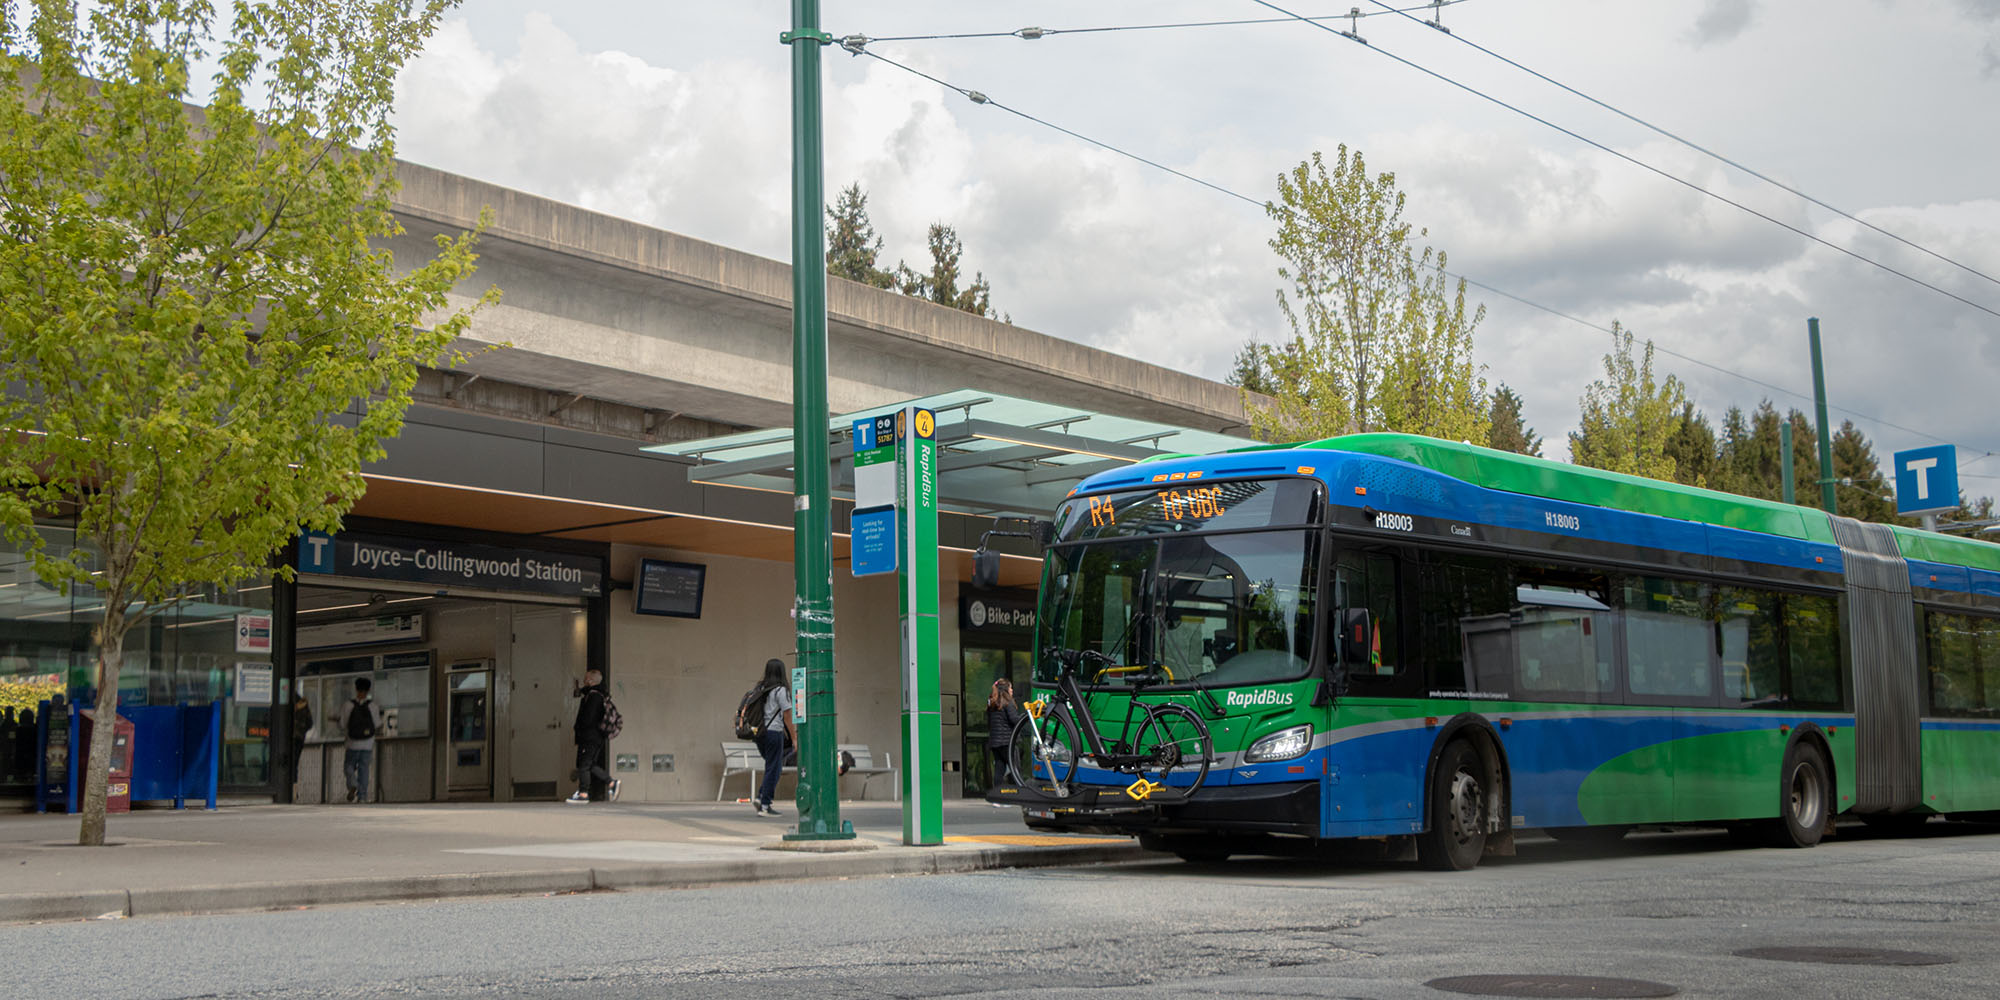 R4 41st Ave RapidBus, one of TransLink's top 10 bus routes, picks up passengers outside Joyce–Collingwood Station